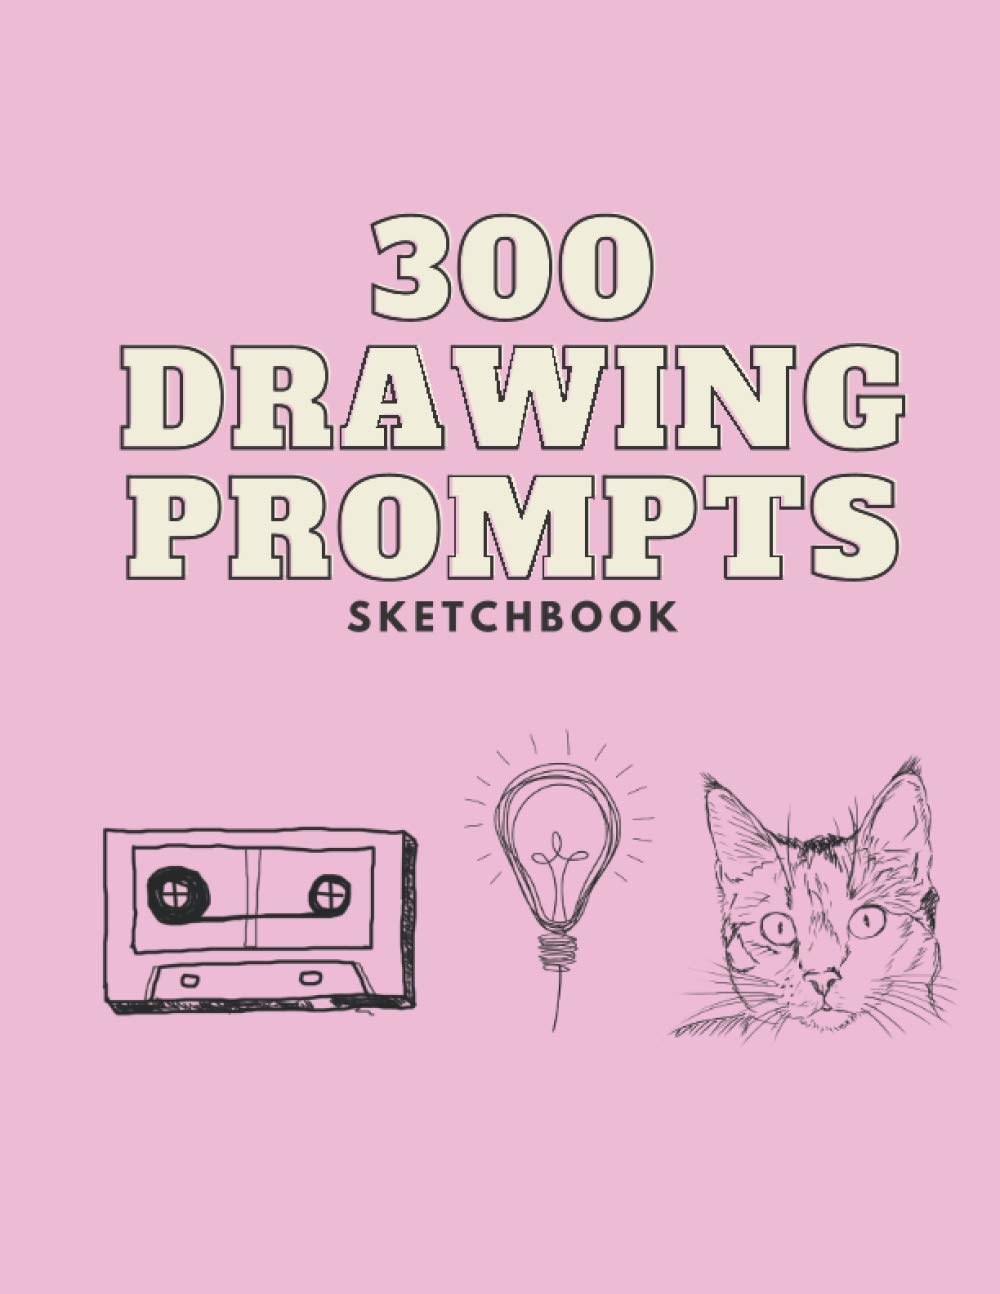 The cover of a sketchbook called 300 drawing prompts sketchbook